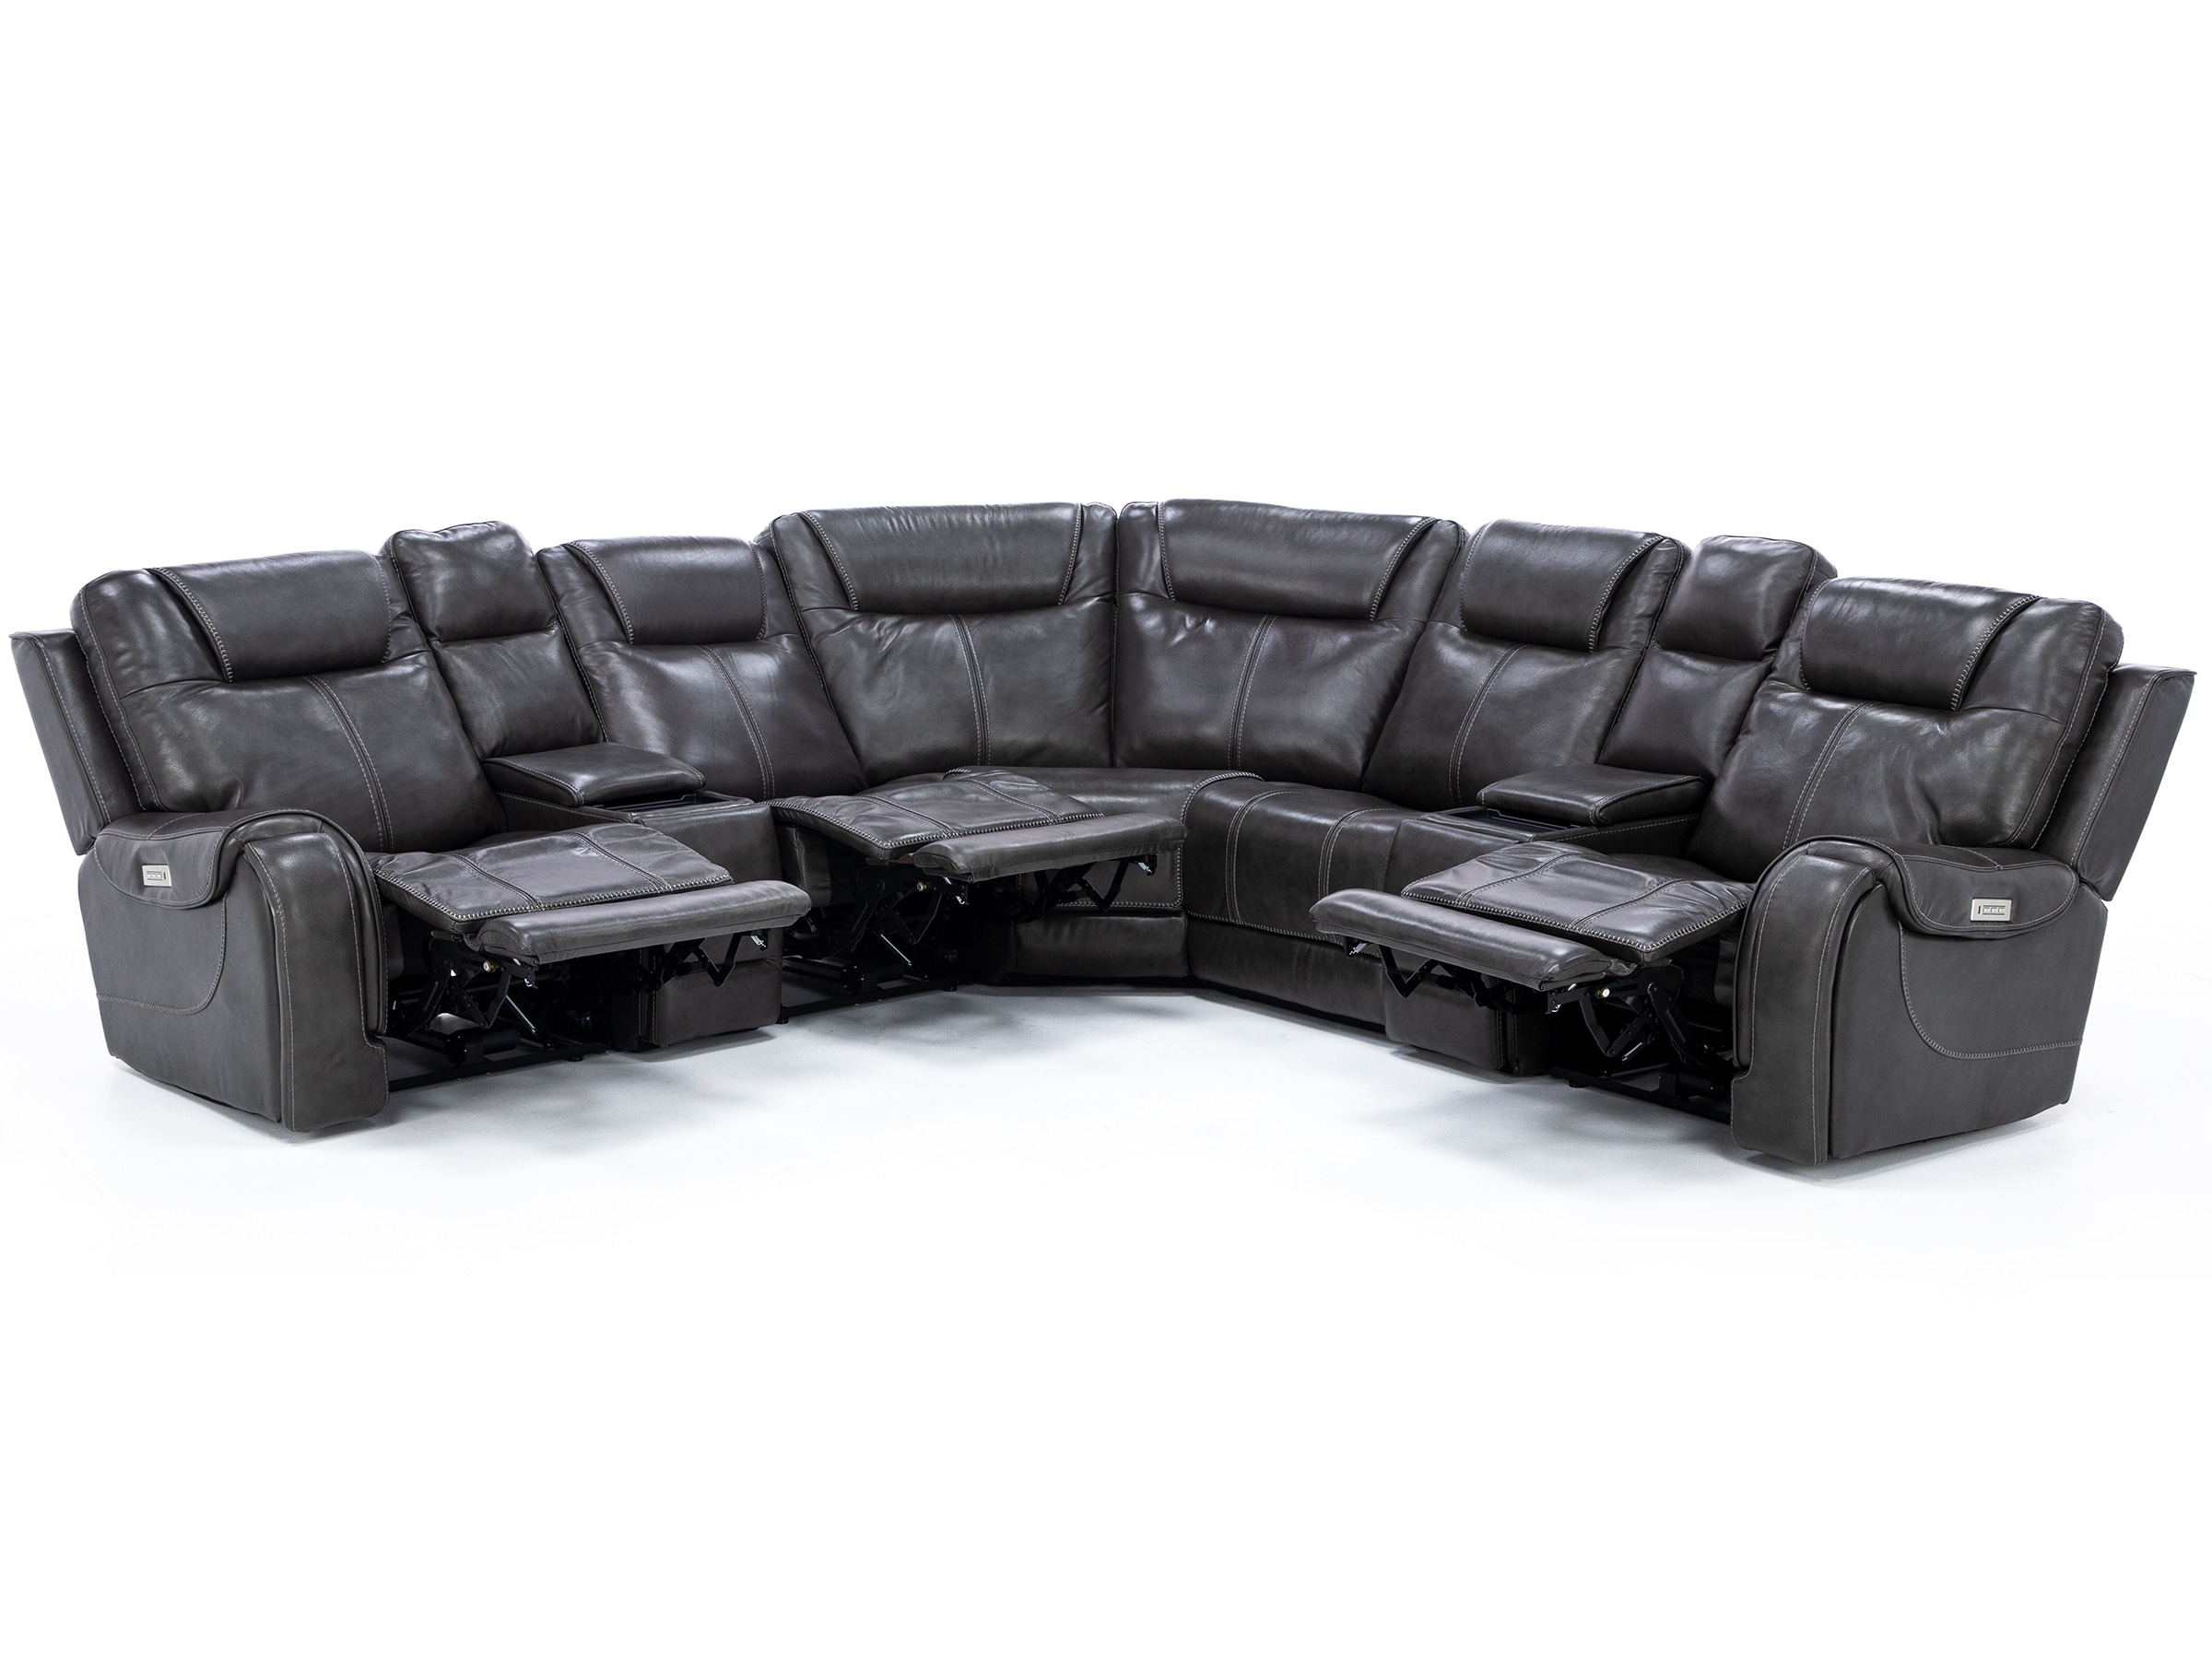 Zion 7-Pc. Leather Loaded | Modular Steinhafels Fully Reclining